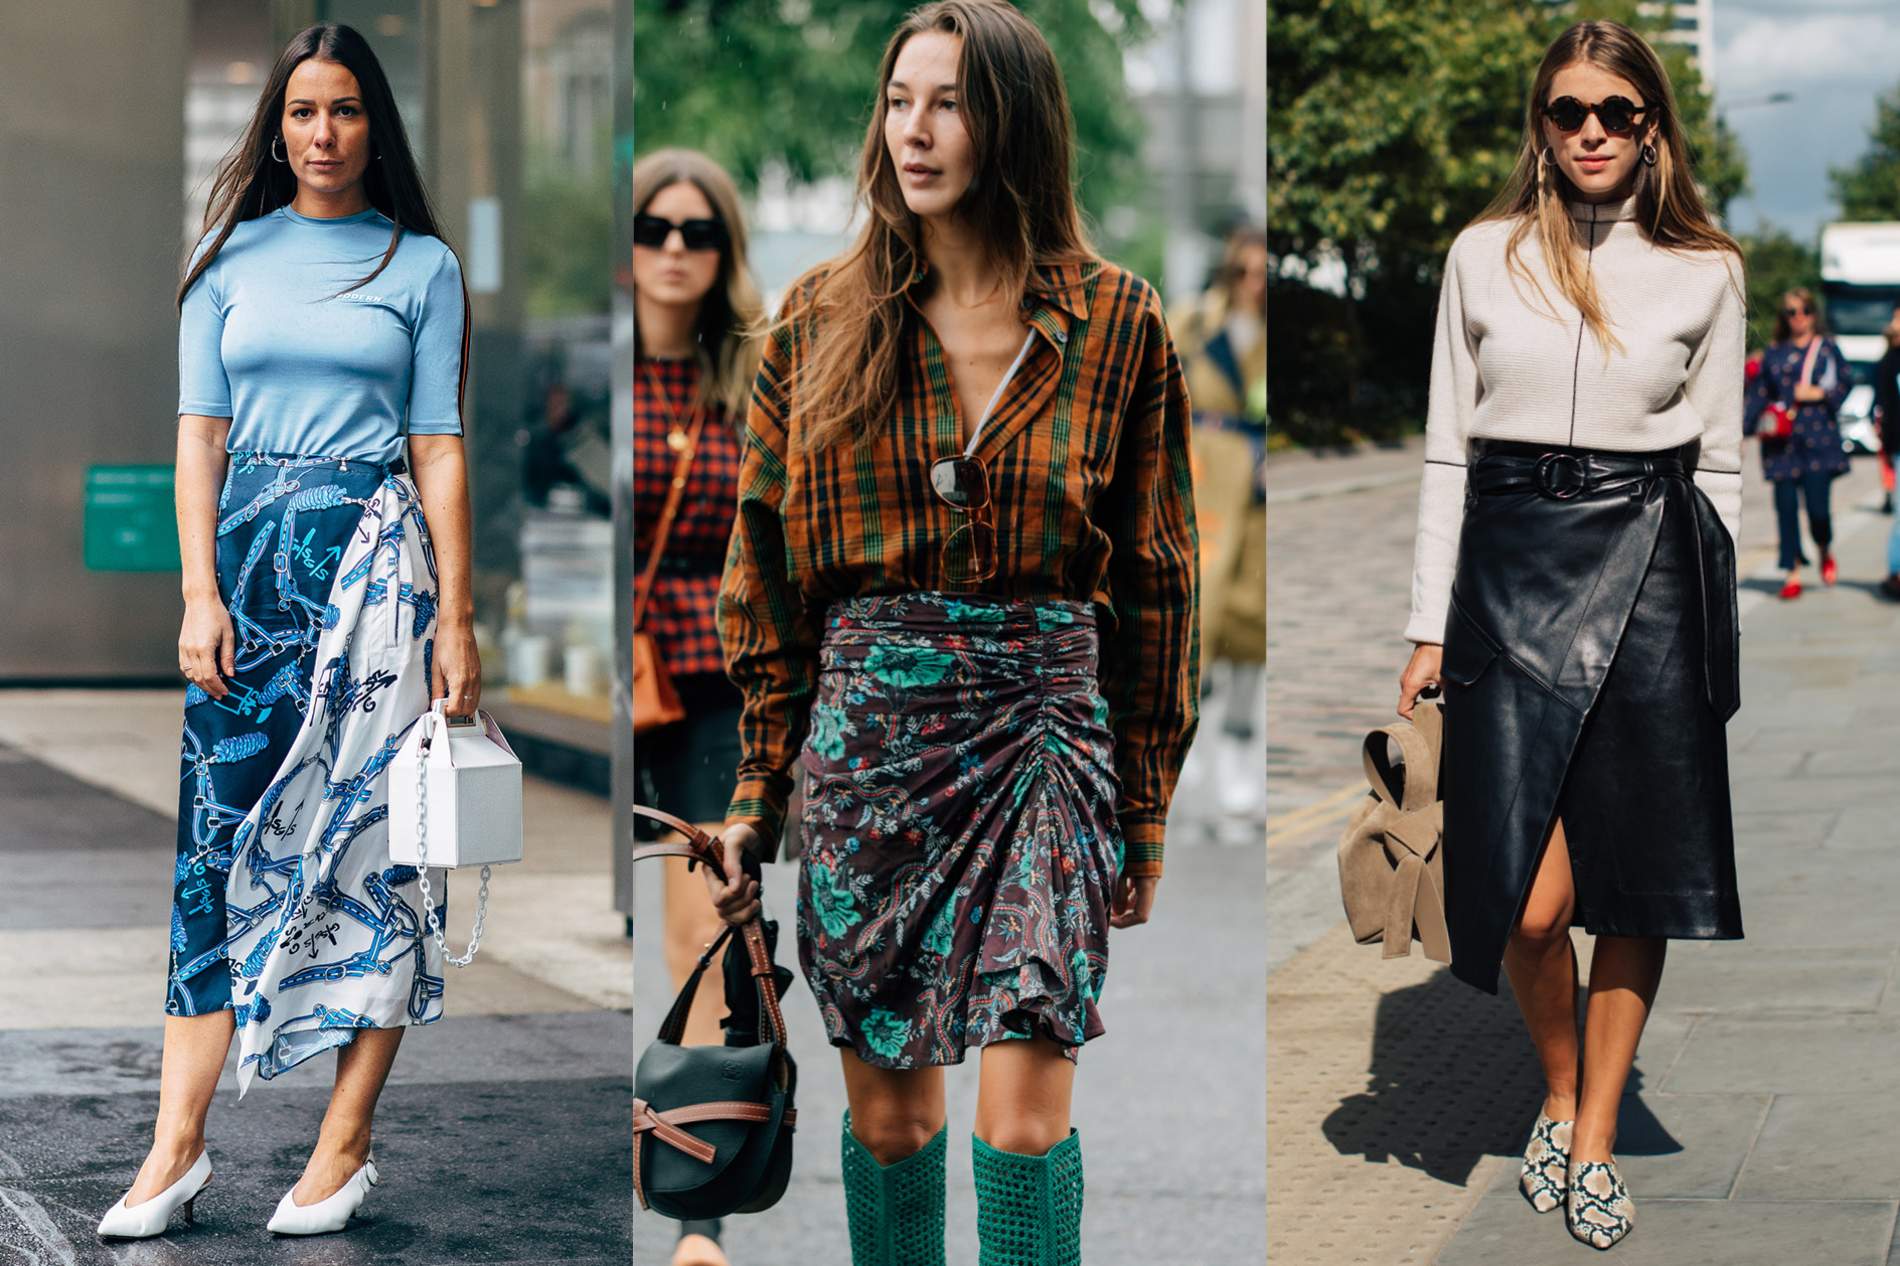 THE OFF-DUTY UPDATE: AN EASY SKIRT